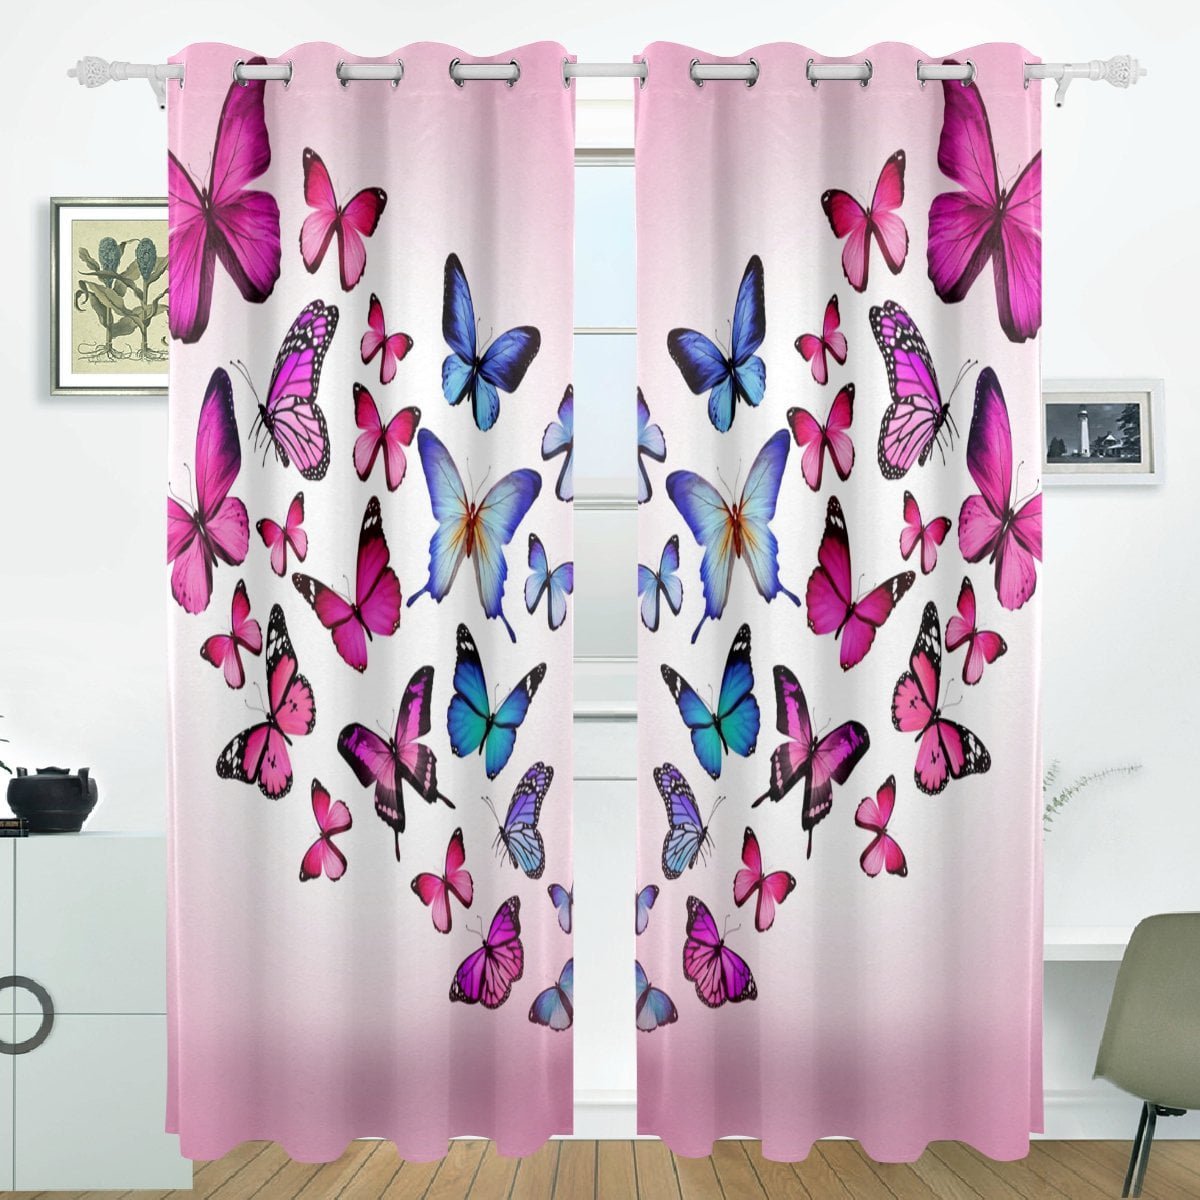 Hippie Pink Butterfly Window Curtain For Living Room Bedroom Curtain 2 Panels 